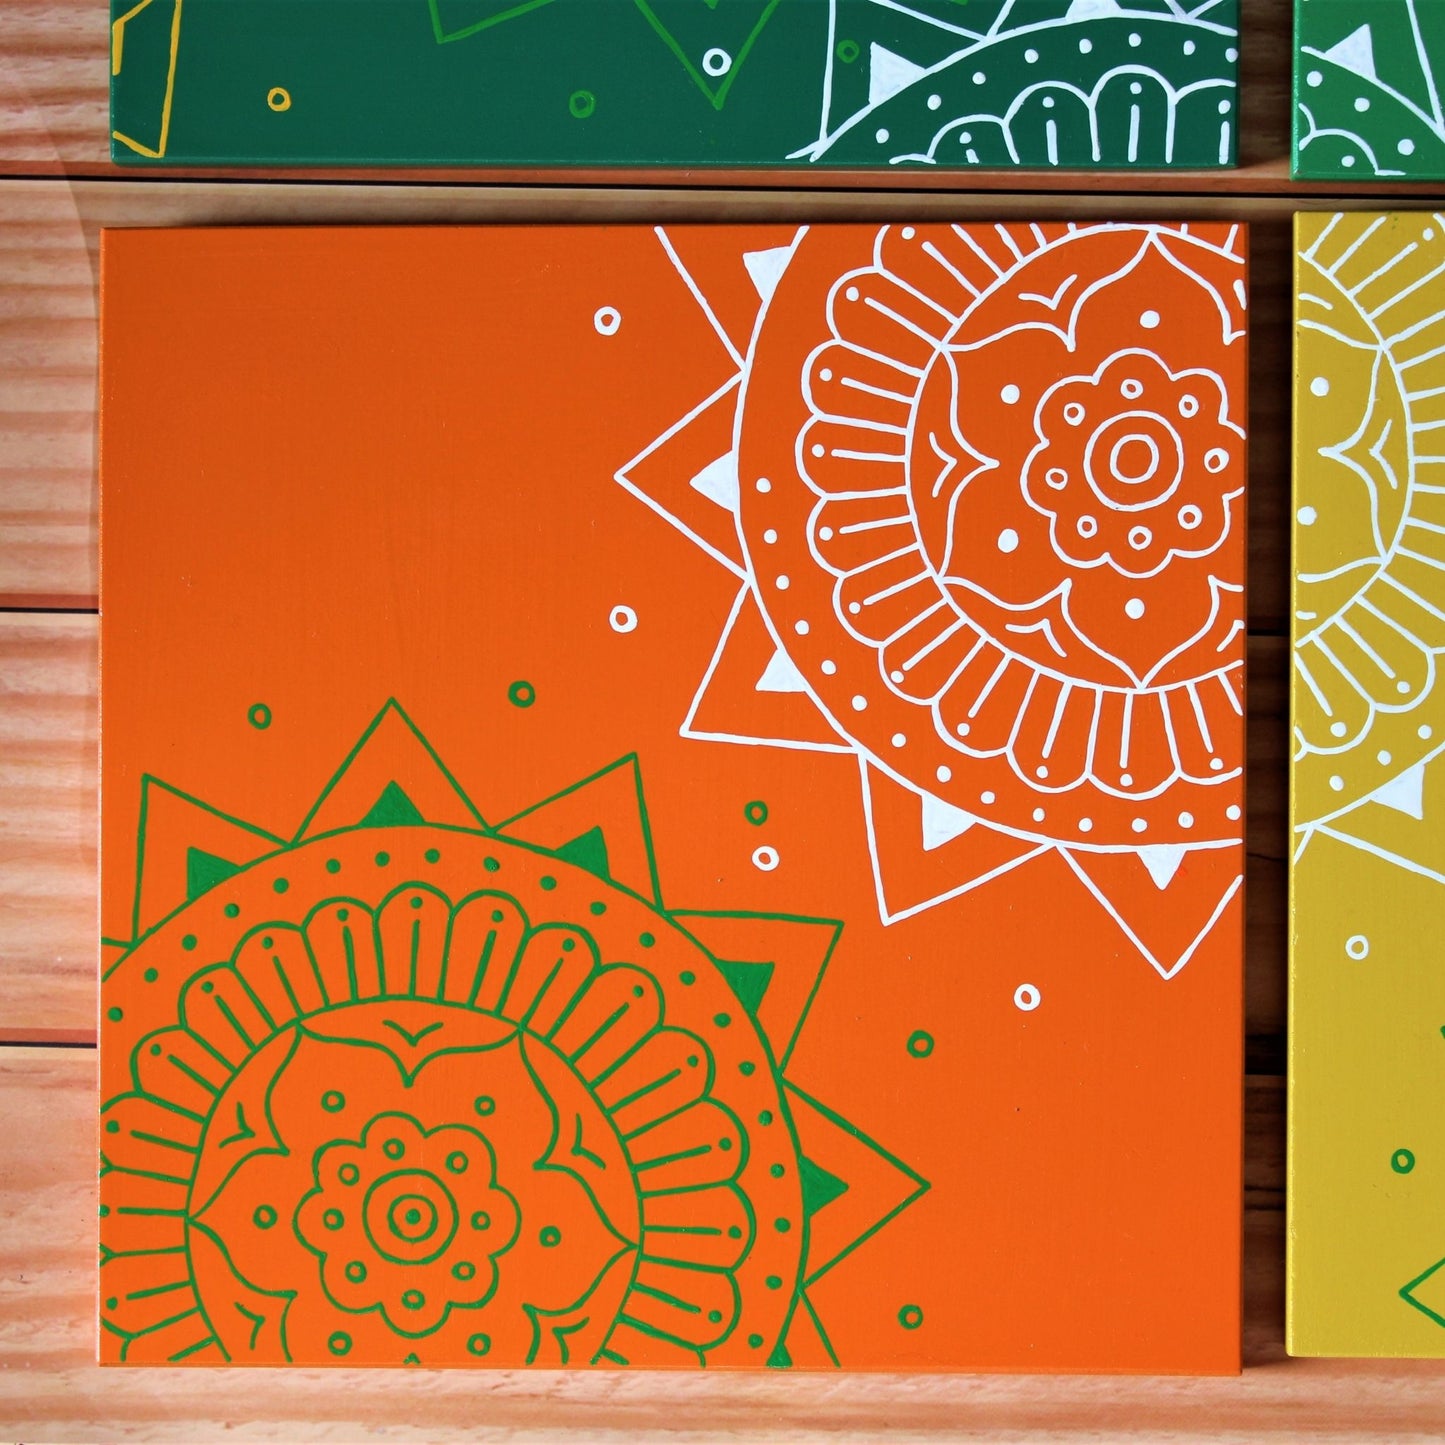 Kumouni Aipan Inspired Wall Frame Tile Handpainted in Green, white and Orange Colors.